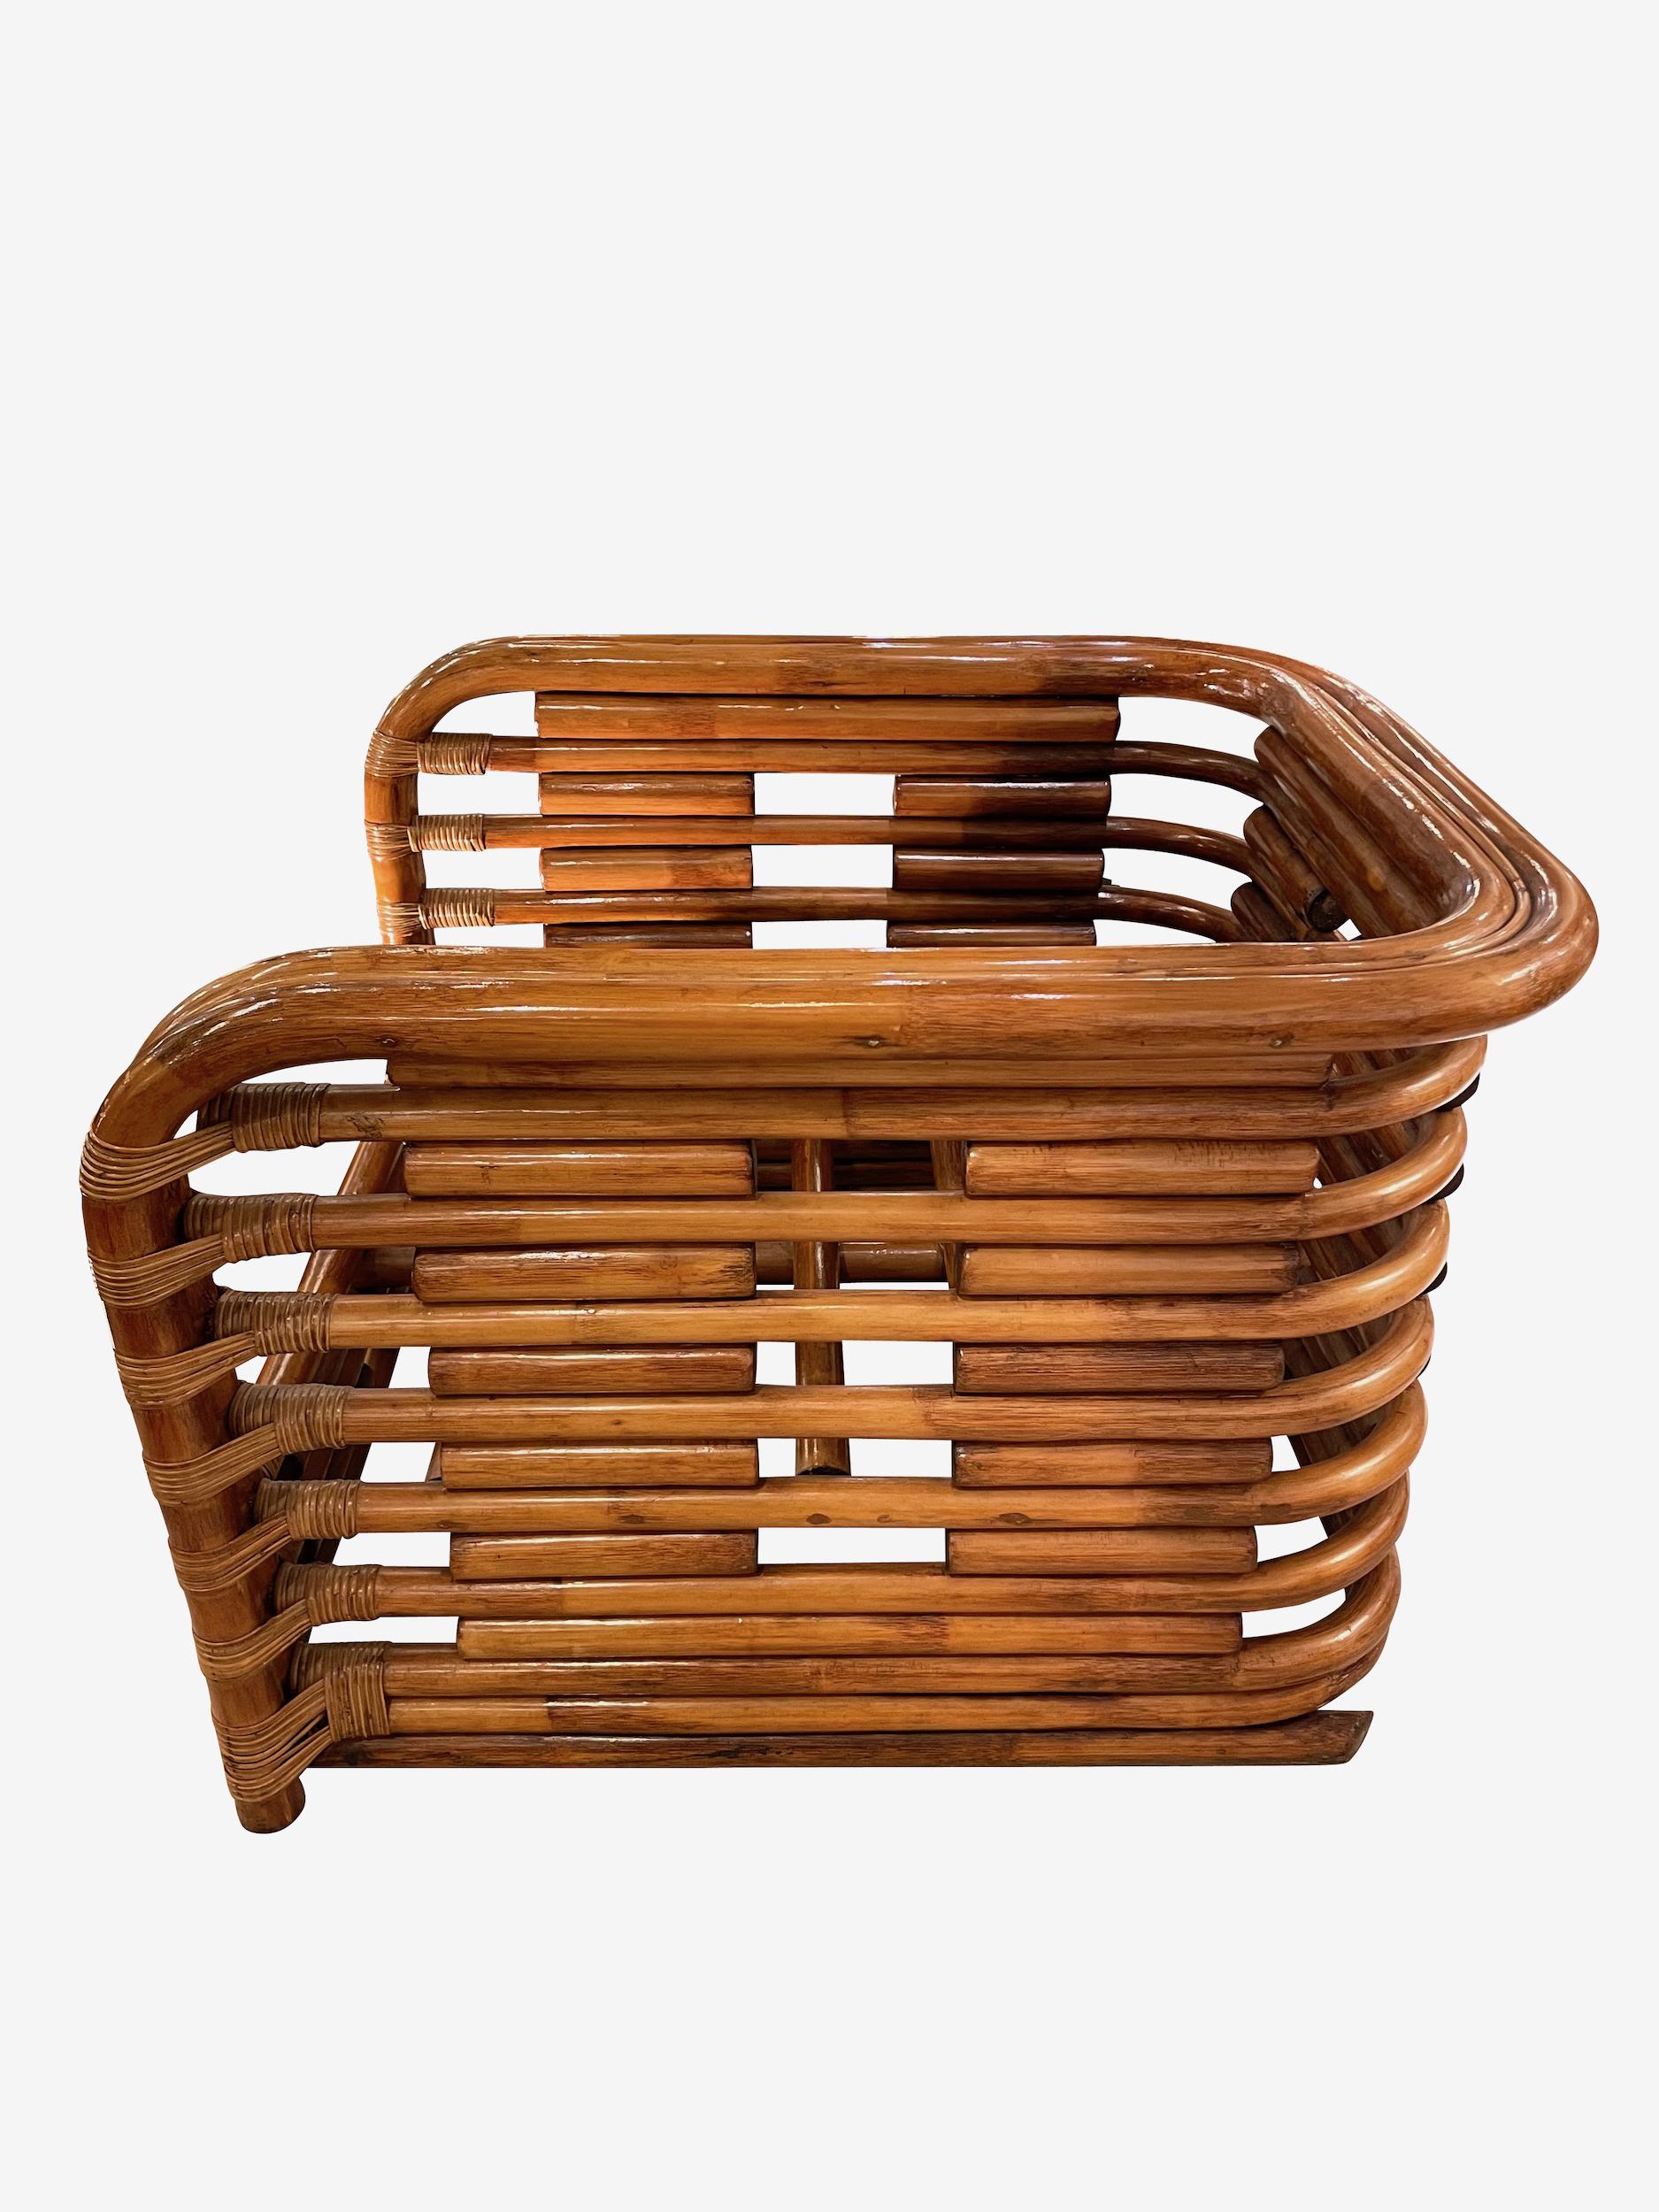 Rattan Set of Six Seating Set, France, 1950s For Sale 5